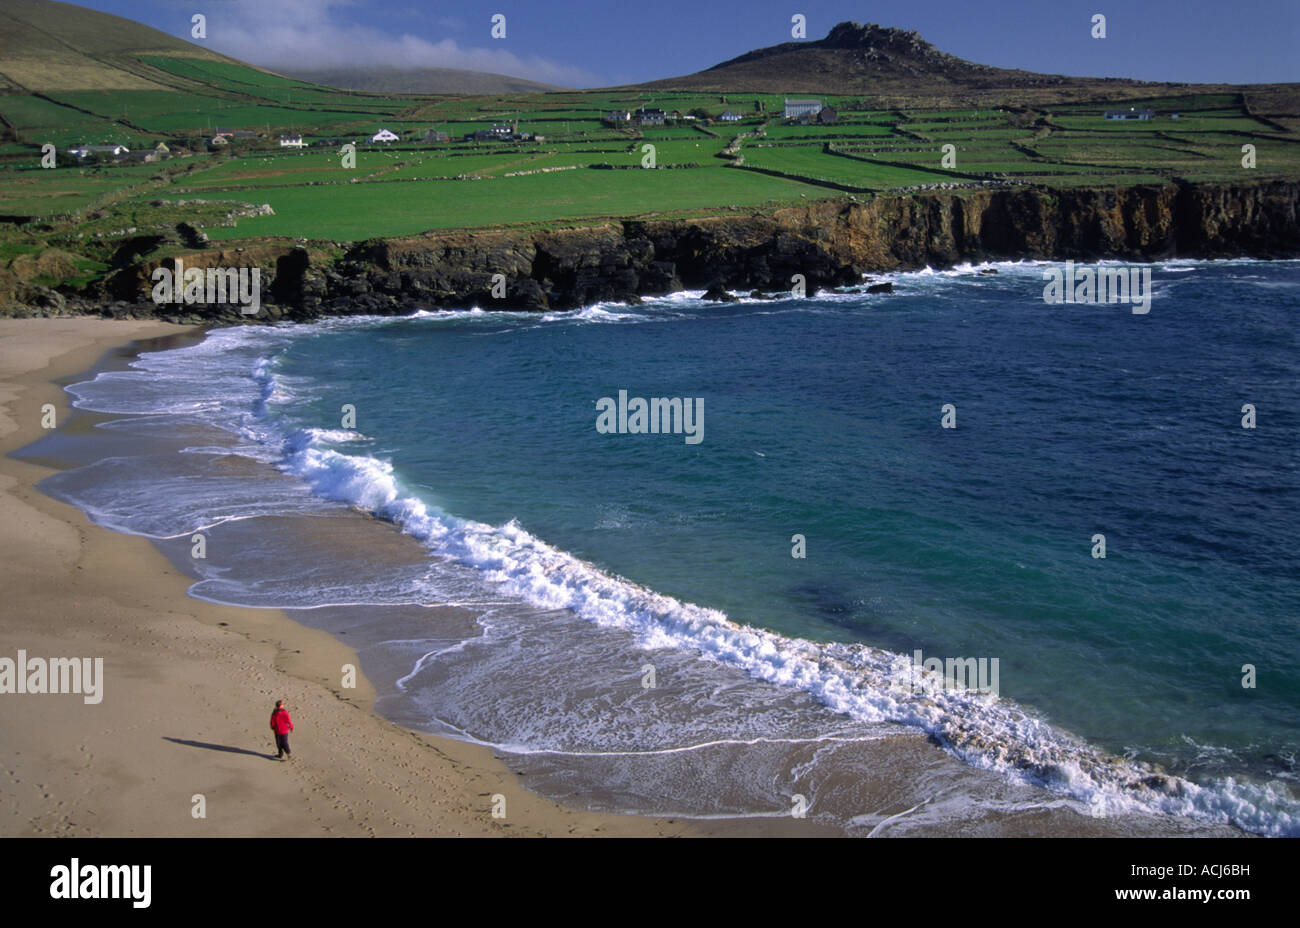 Person walking on Clogher Beach, beneath patchwork green fields. Dingle Peninsula, County Kerry, Ireland. Stock Photo